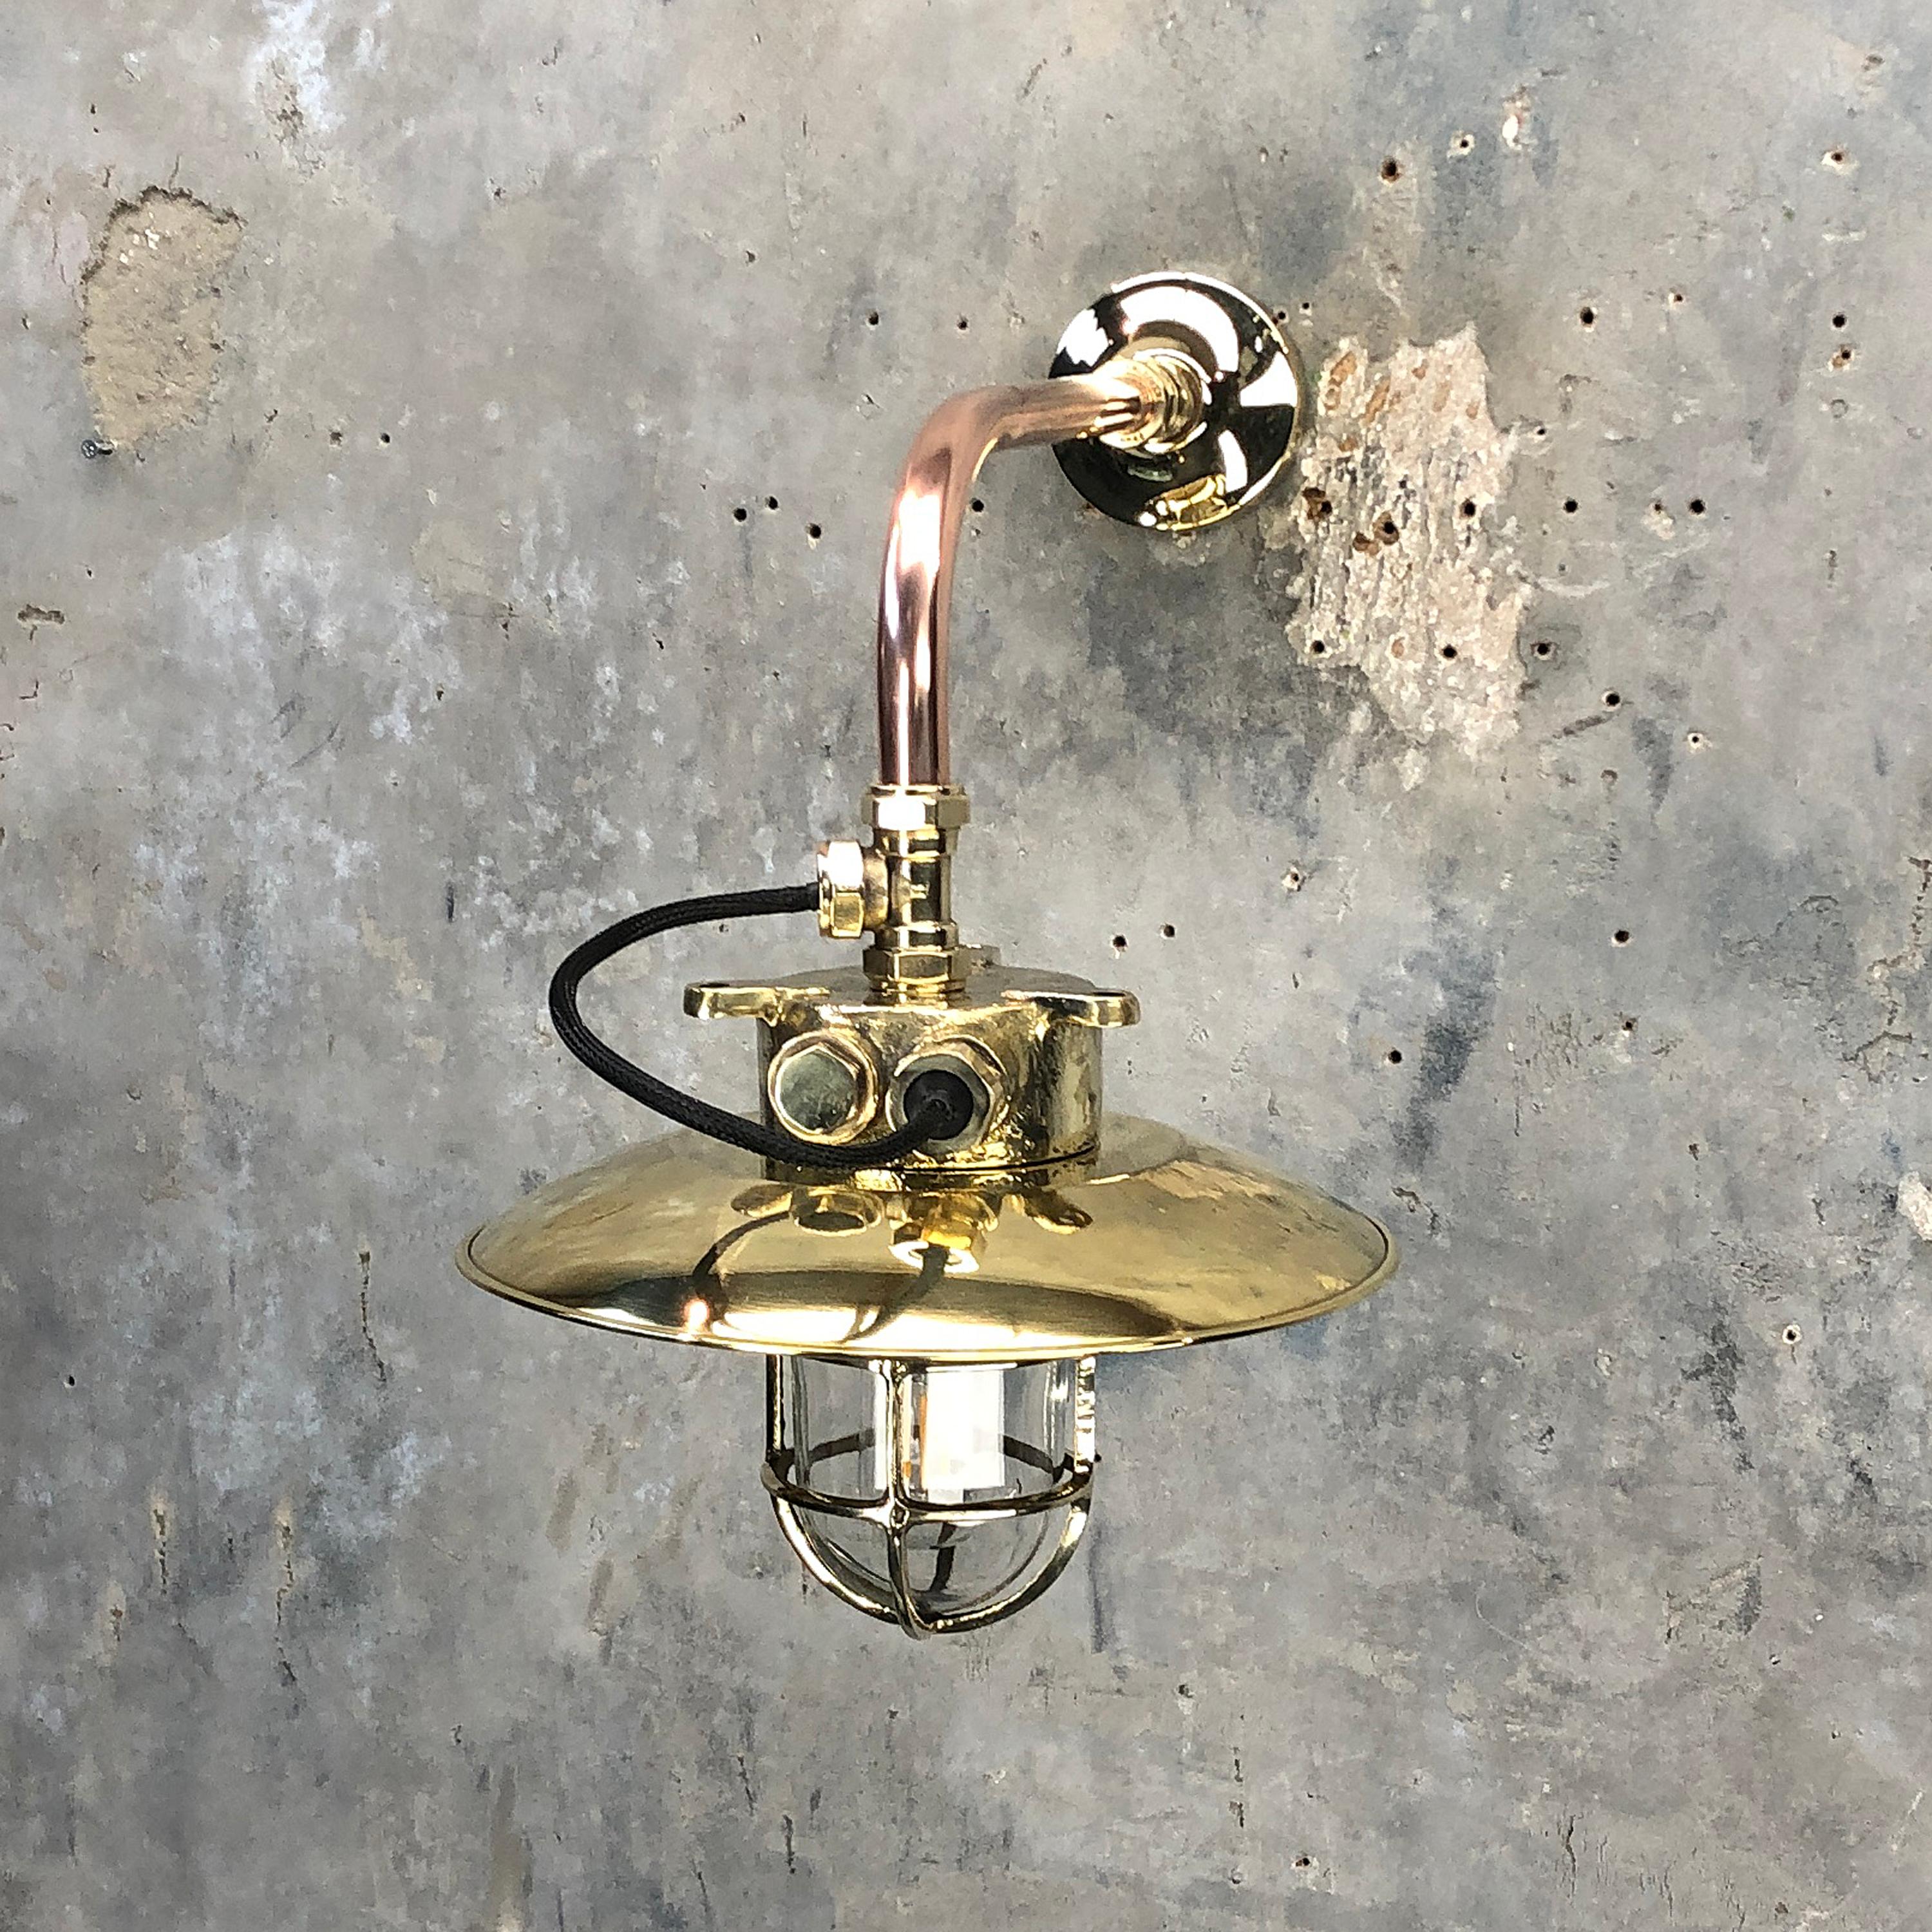 1970s Japanese Cast Brass and Copper Explosion Proof Caged Cantilever Wall Light 7